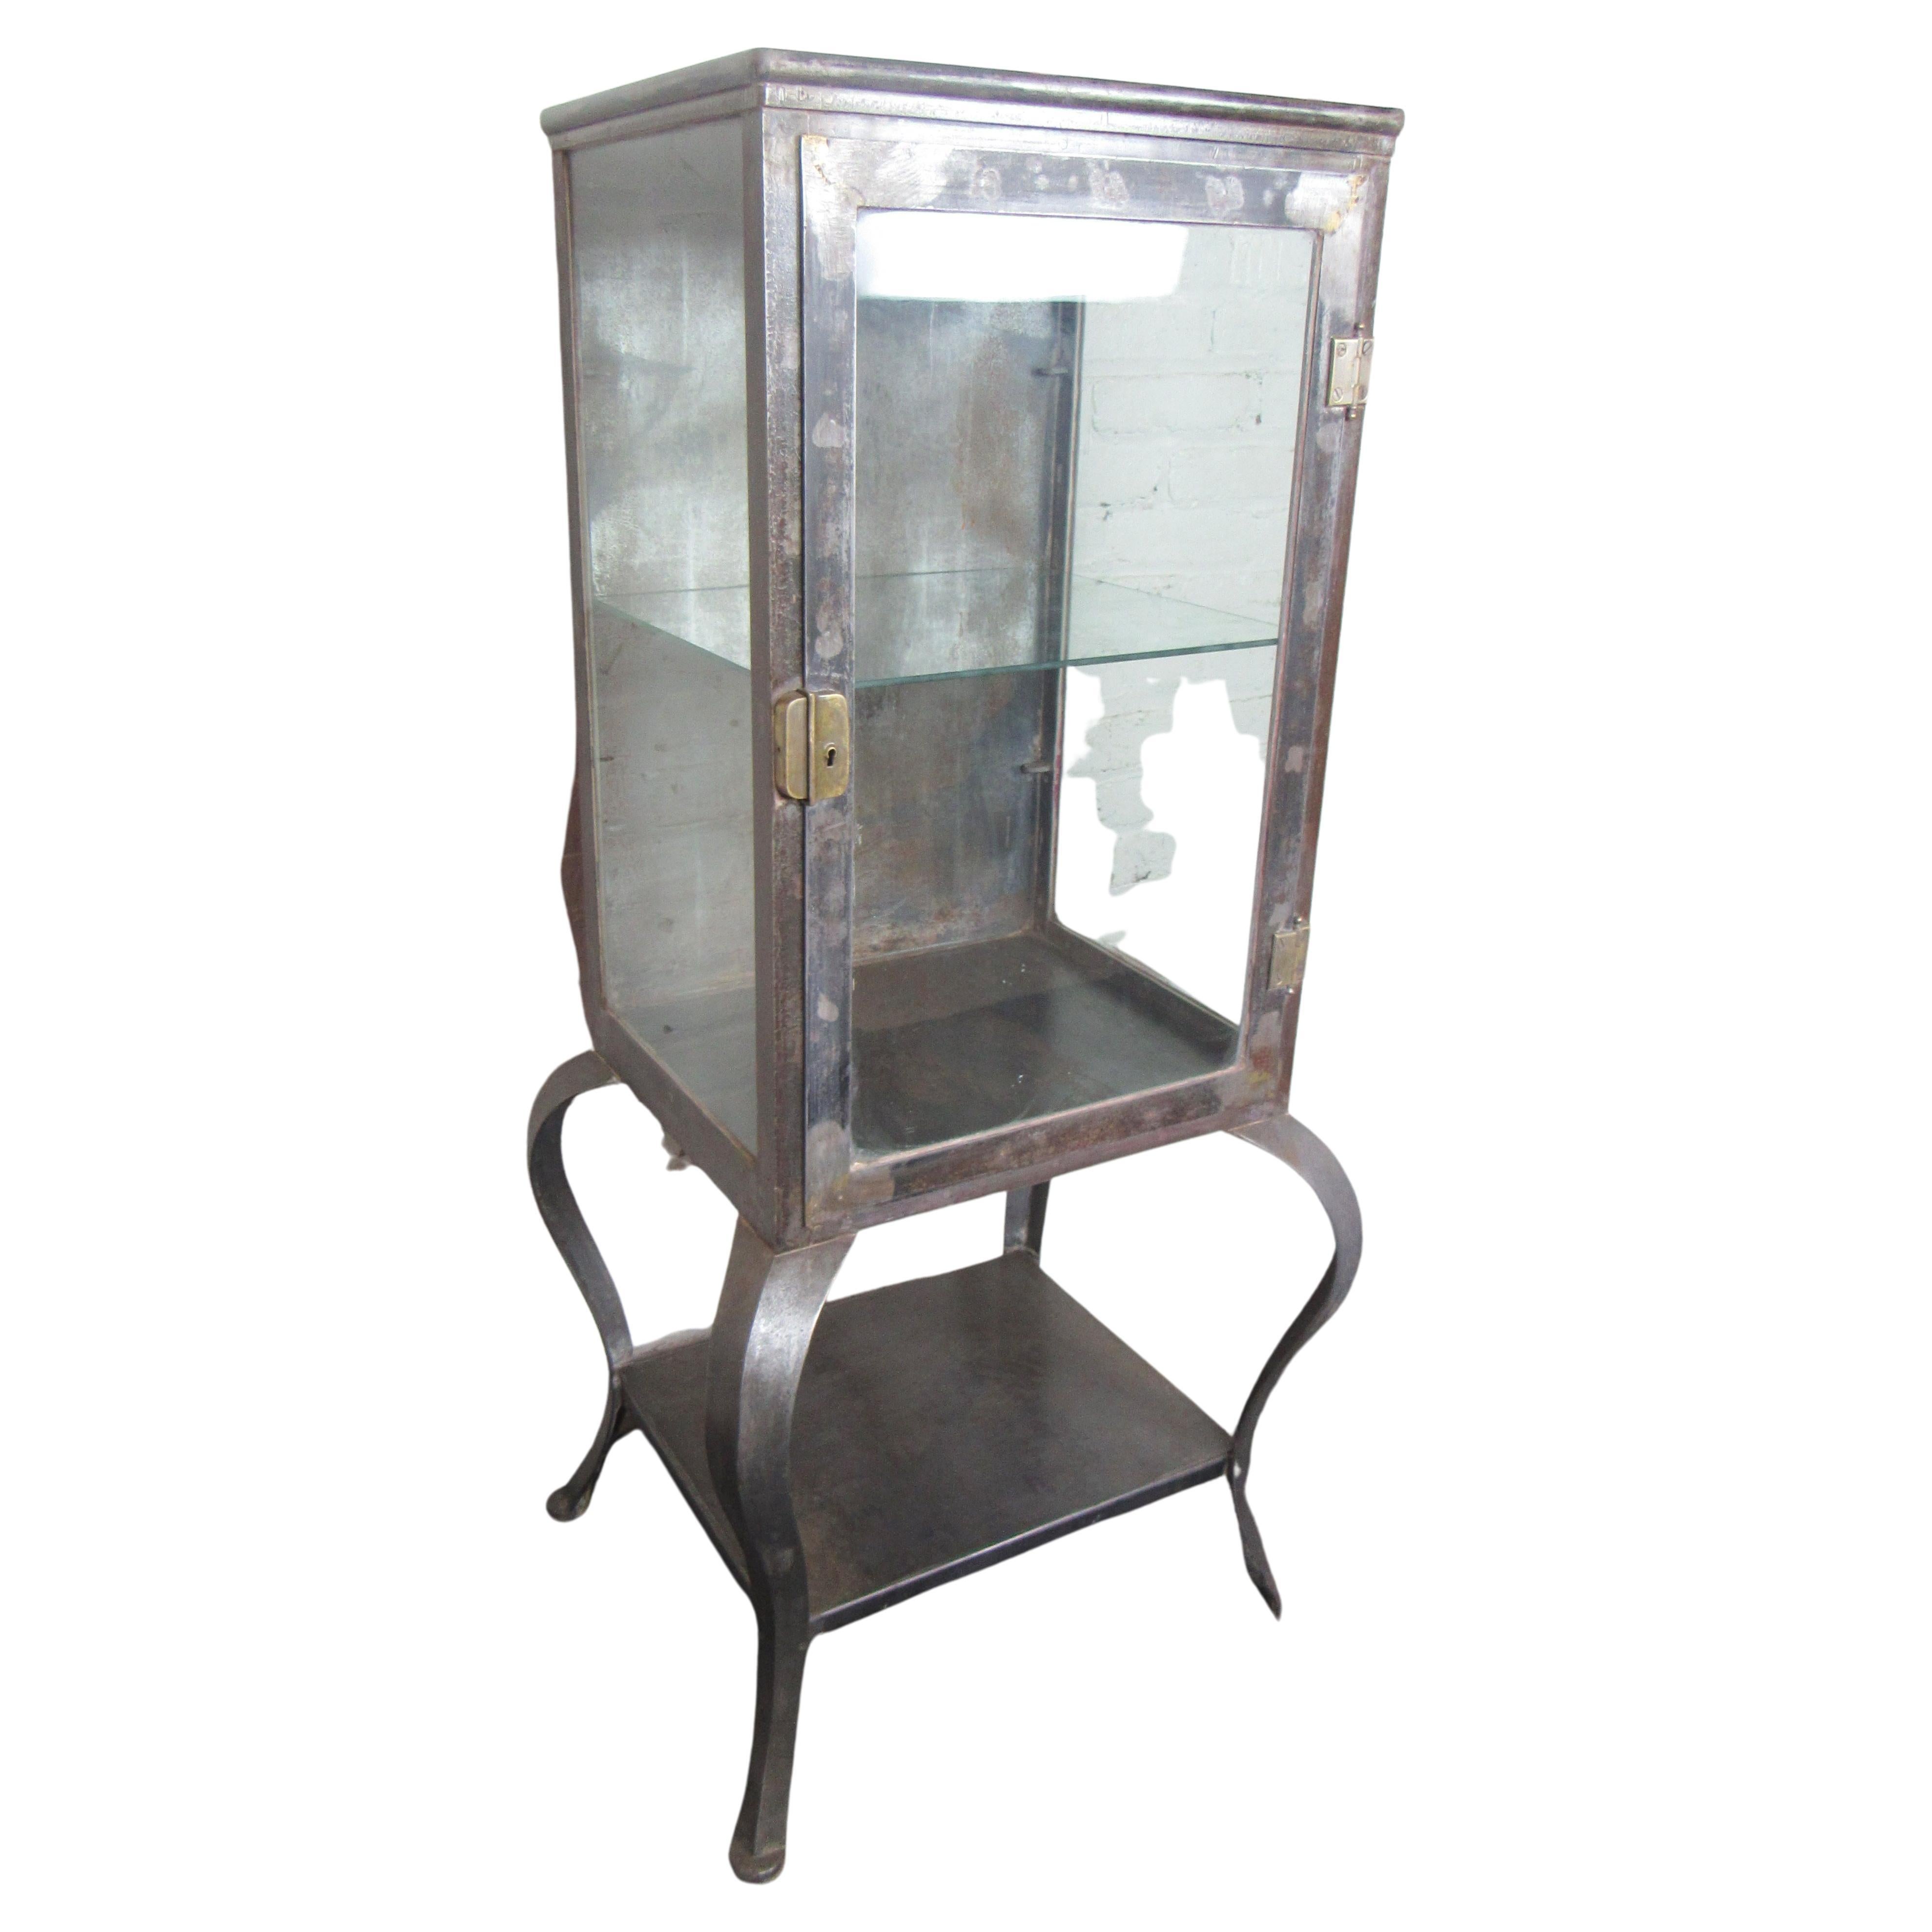 INDUSTRIAL CABINET GLASS FRONTED METAL DISPLAY CABINET STORAGE UNIT H87cm x W100 